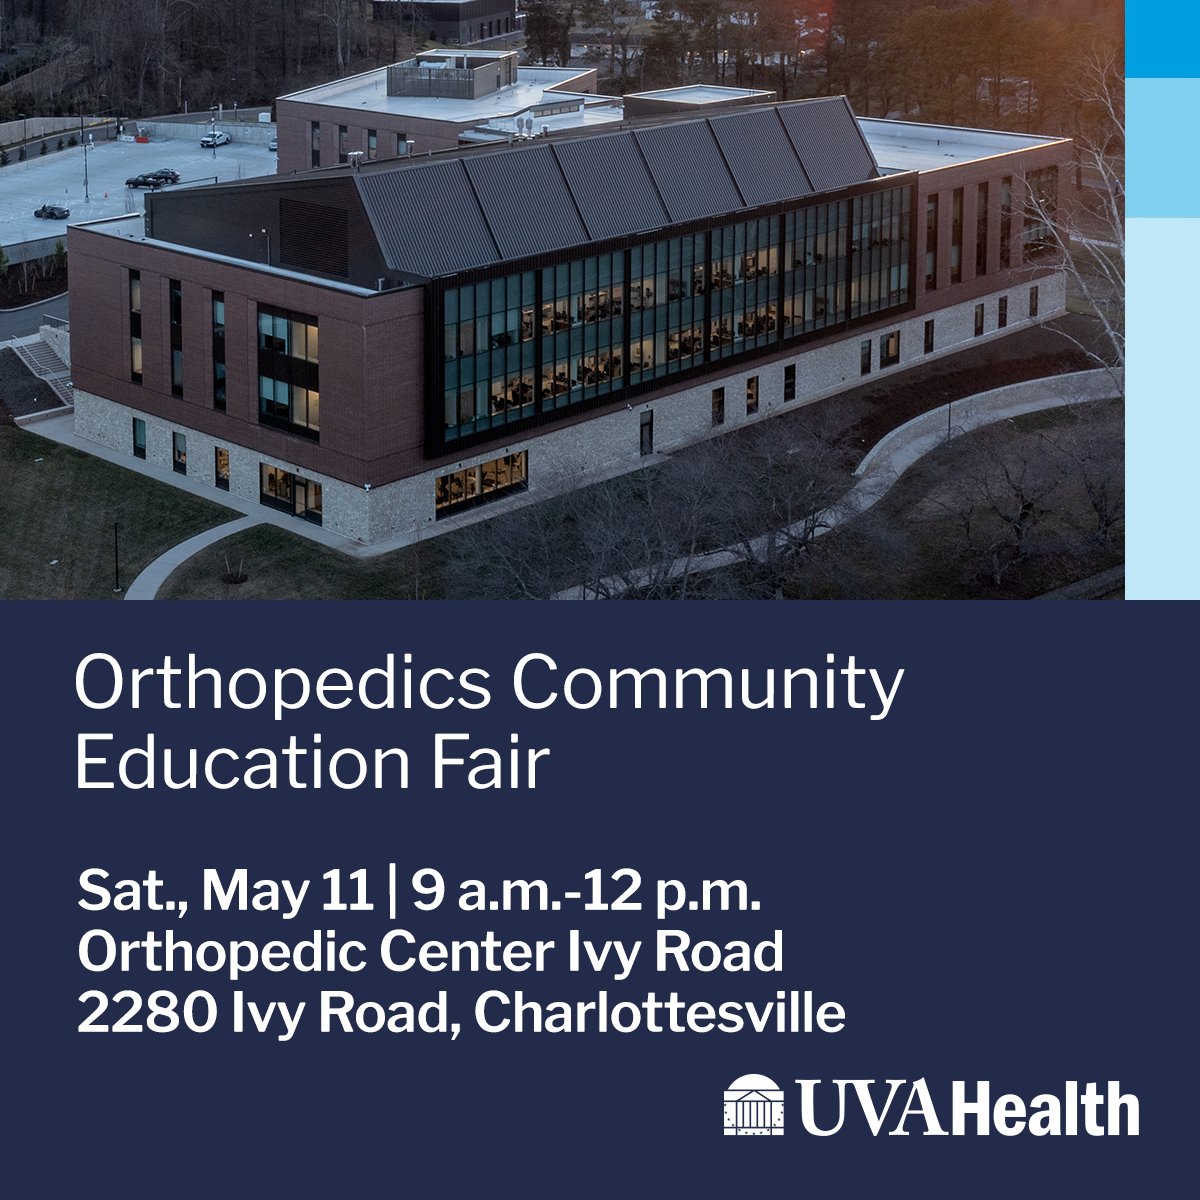 Join us May 11 for our free orthopedics community education fair. Enjoy hands-on demos, provider talks on various topics, and fun activities for kids. More info: bit.ly/49Voph8 @UVA_Ortho #Charlottesville #Cville #UVAHealth